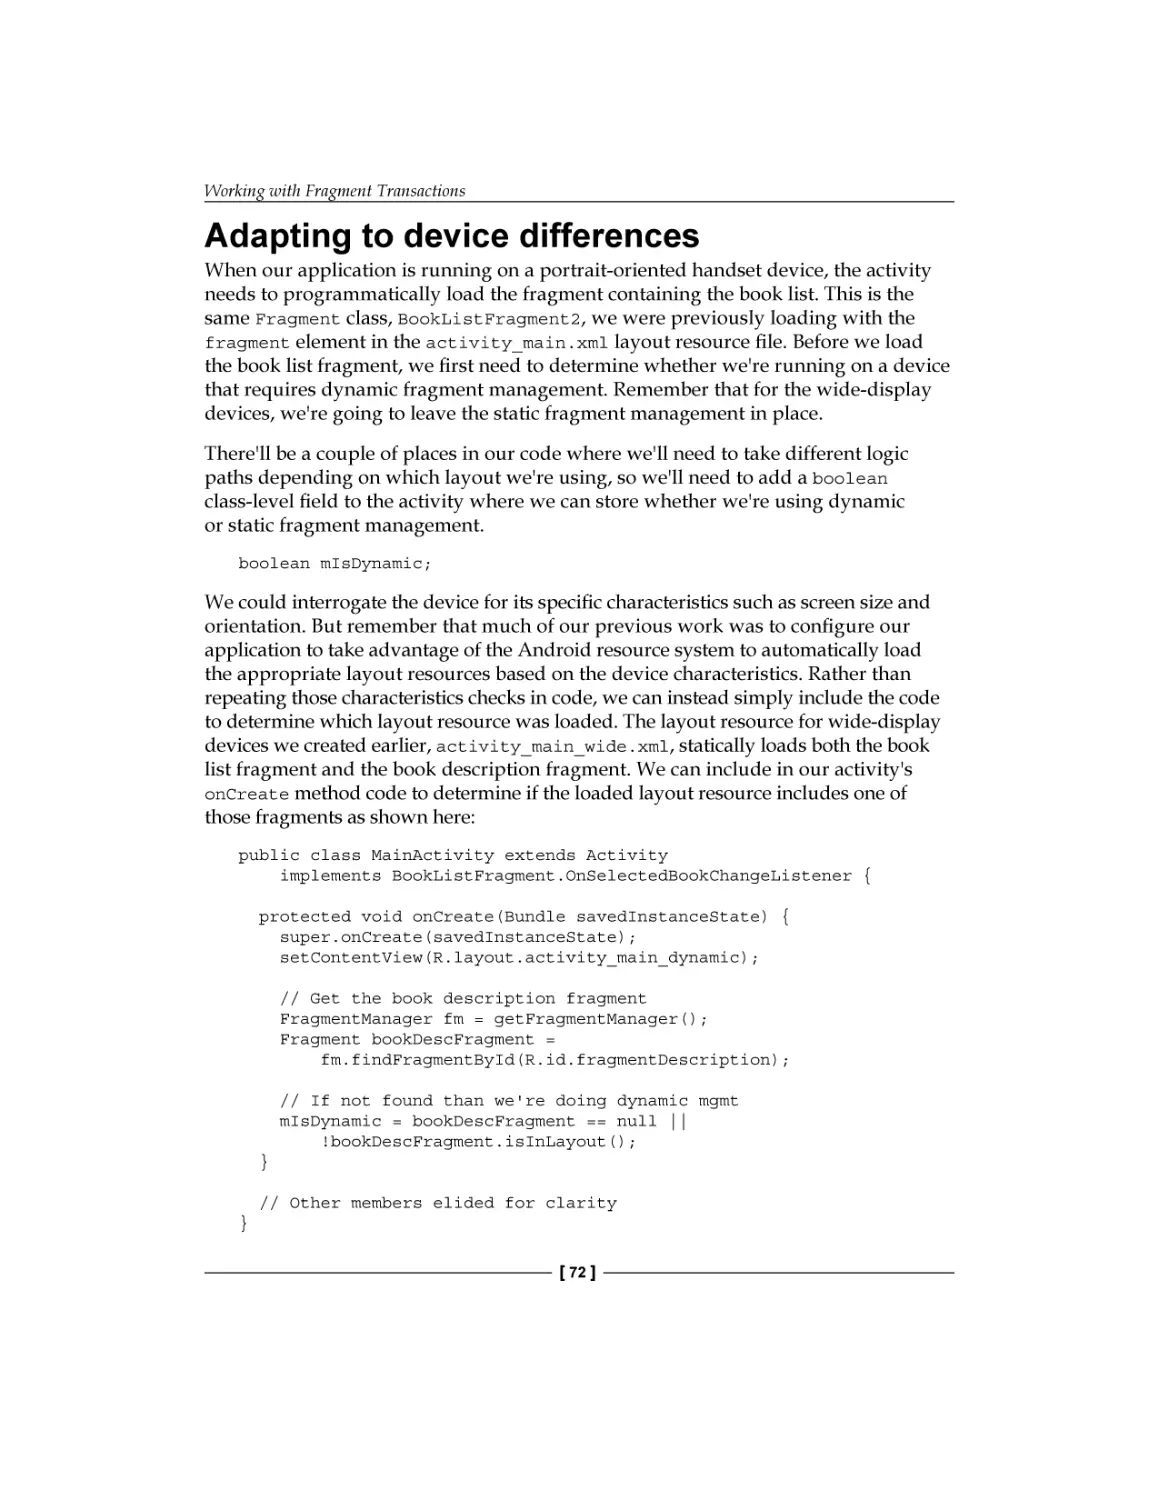 Adapting to device differences